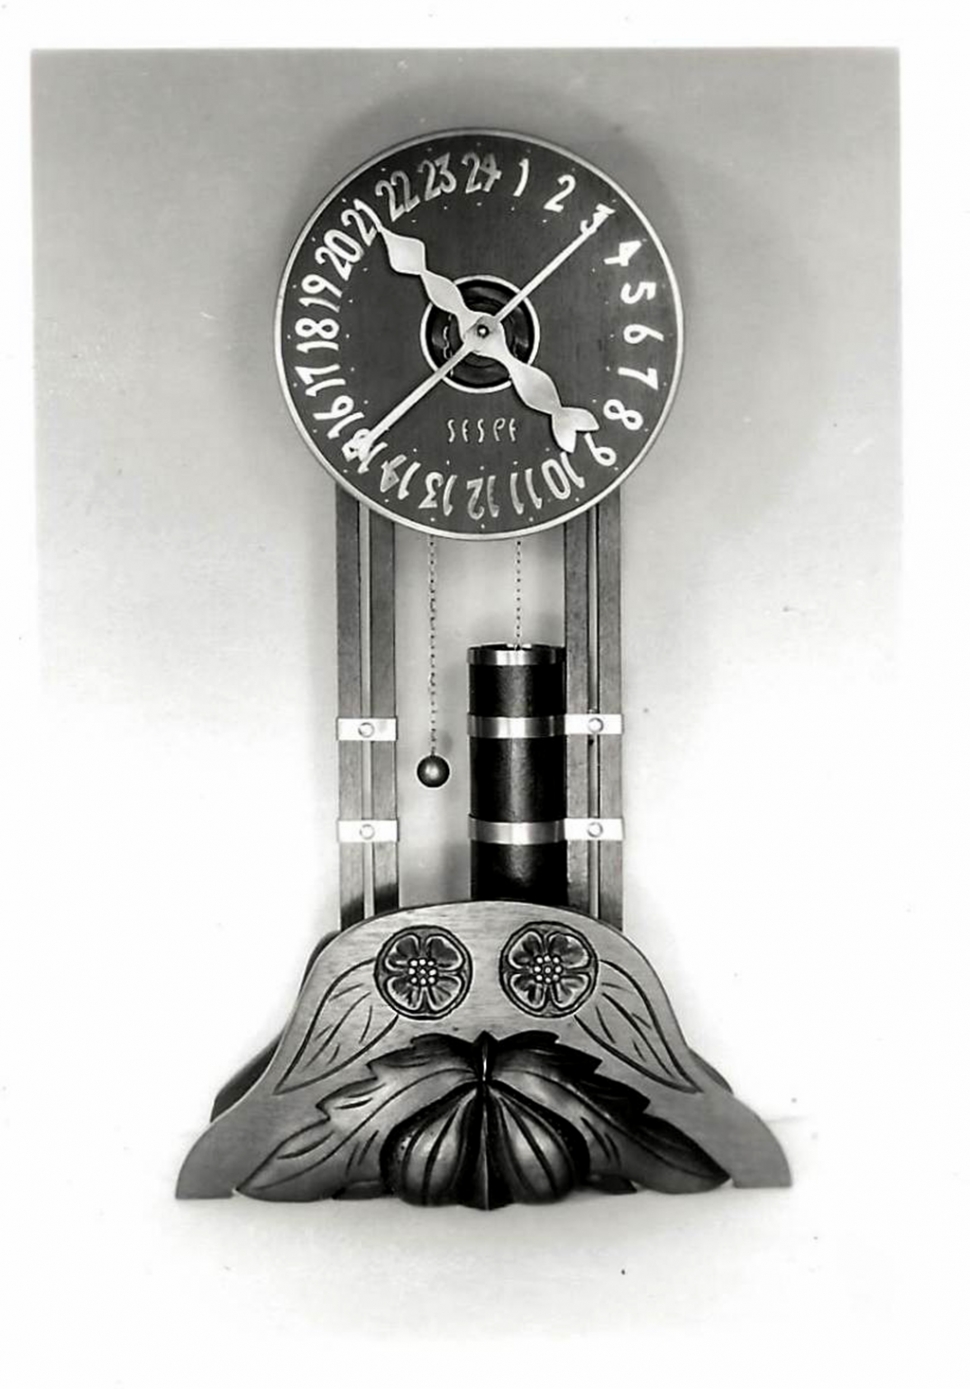 The “Sespe”, an electric clock, table model created by Glen Mosbarger, the dial and hands are made so that time could be read either in 12 hour or 24-hour time at a glance.
